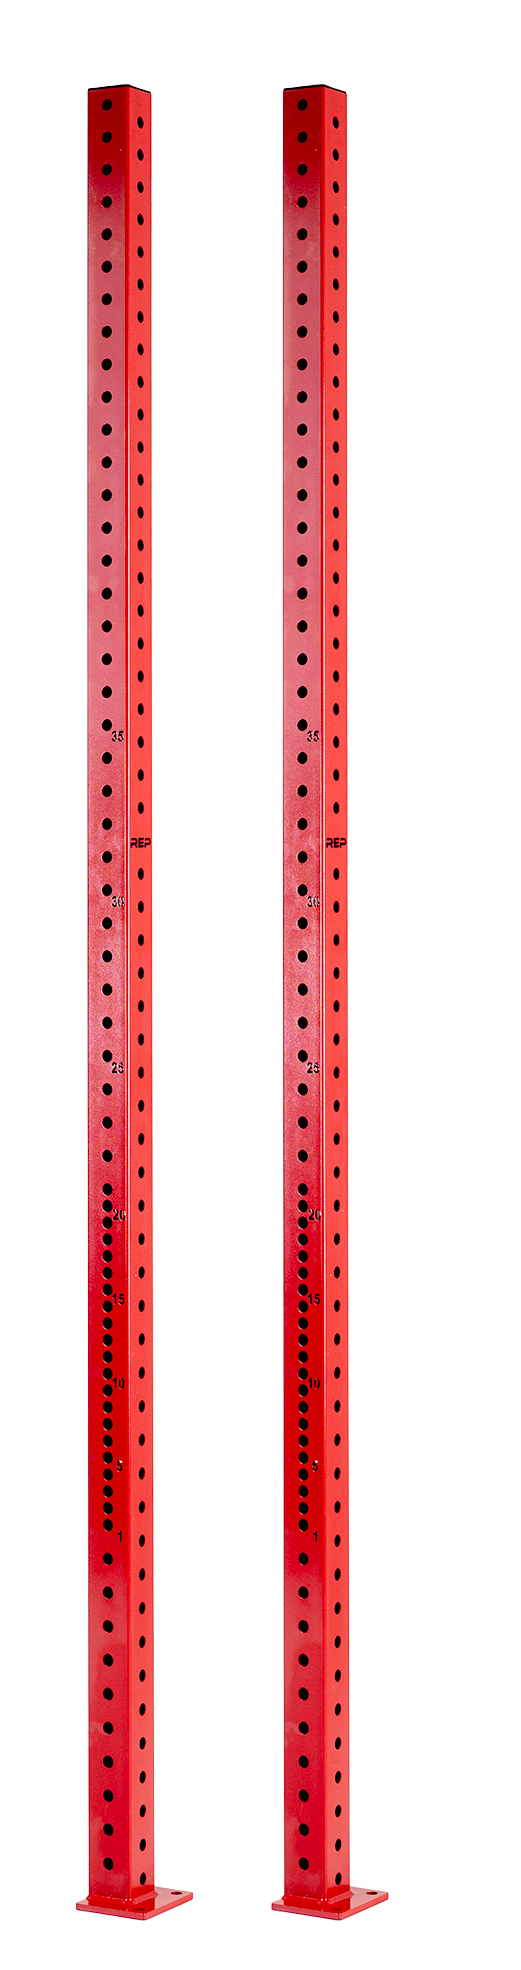 Rig Uprights - 4000 / Pair / Red